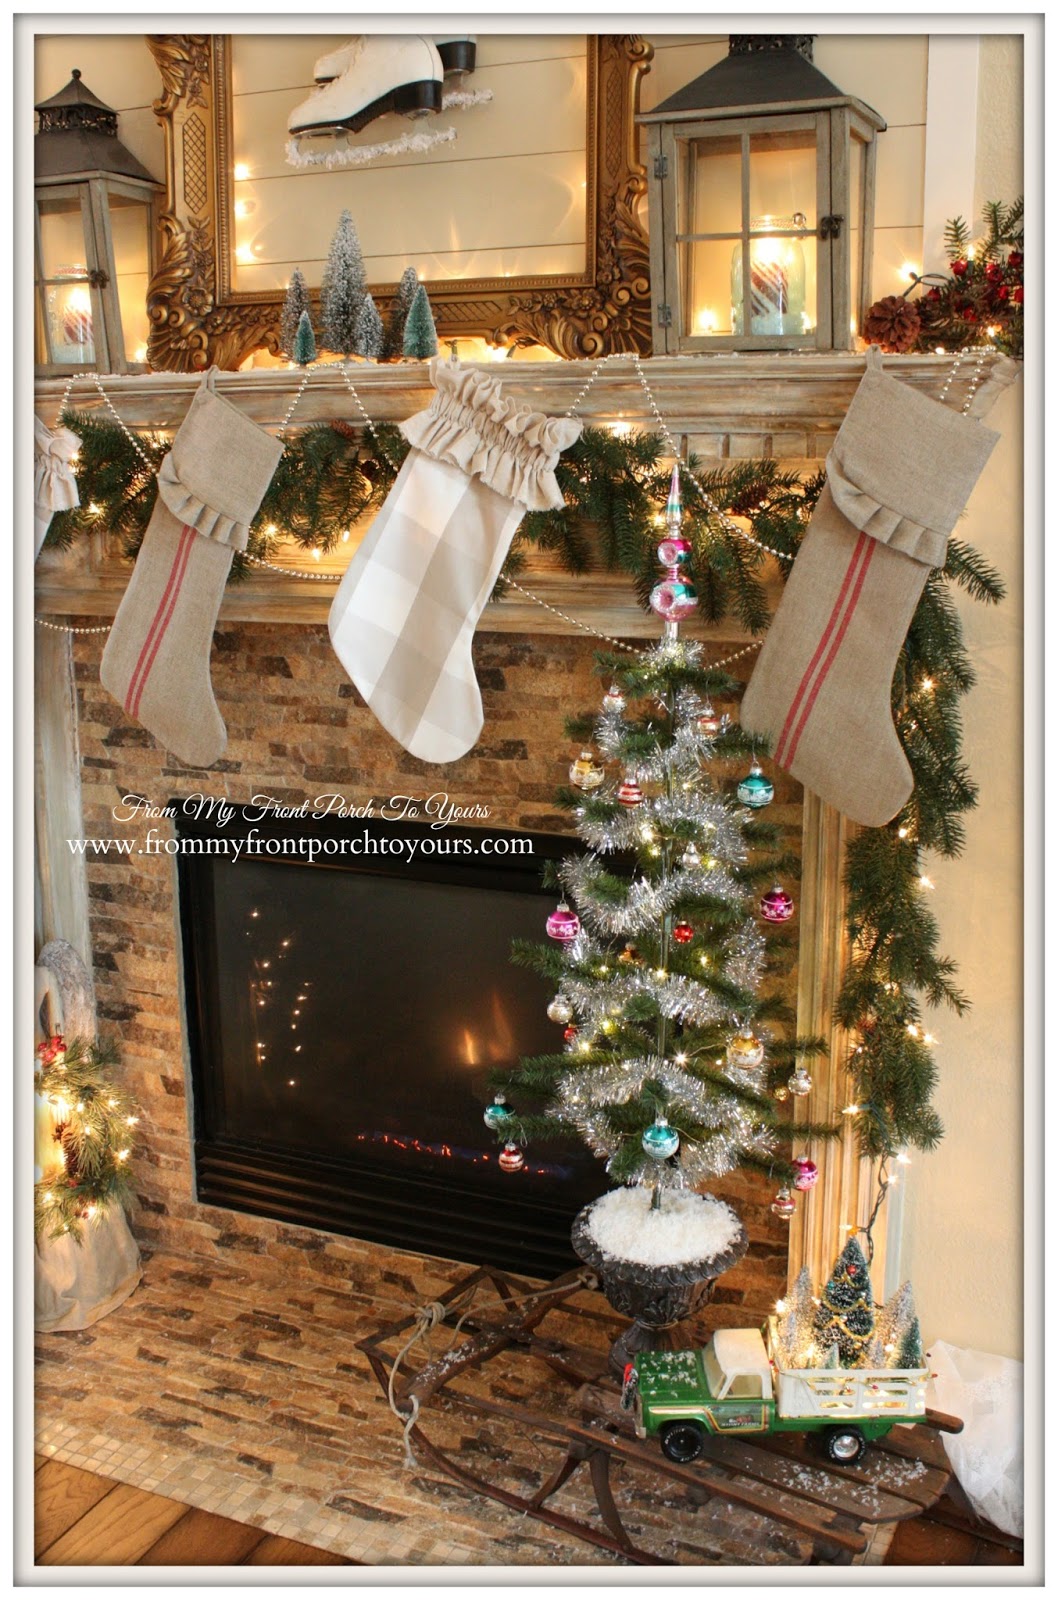 French Farmhouse-French Country- Vintage Christmas Mantel- From My Front Porch To Yours